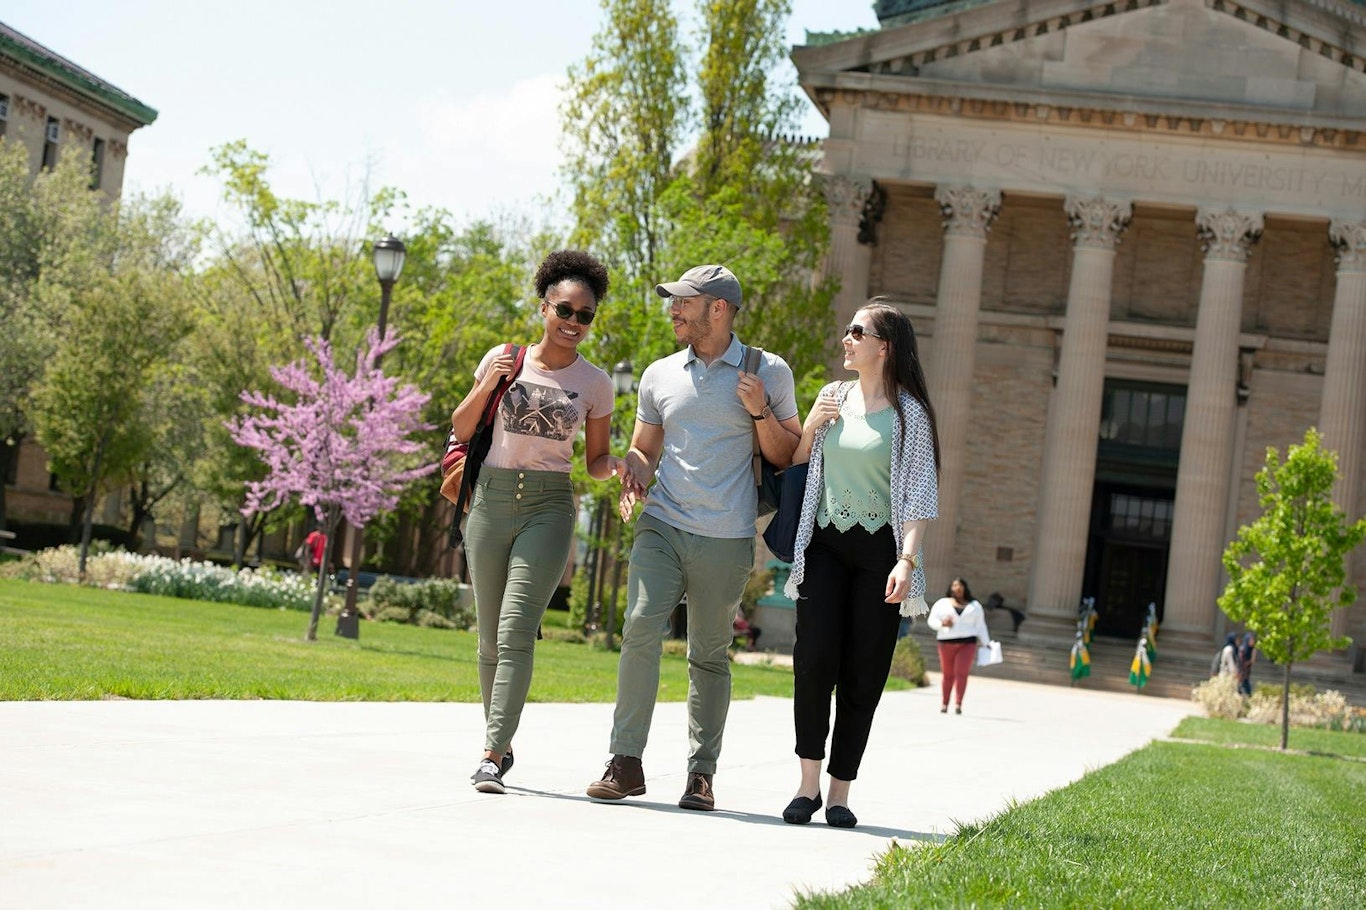 A group of students walking on a college campus